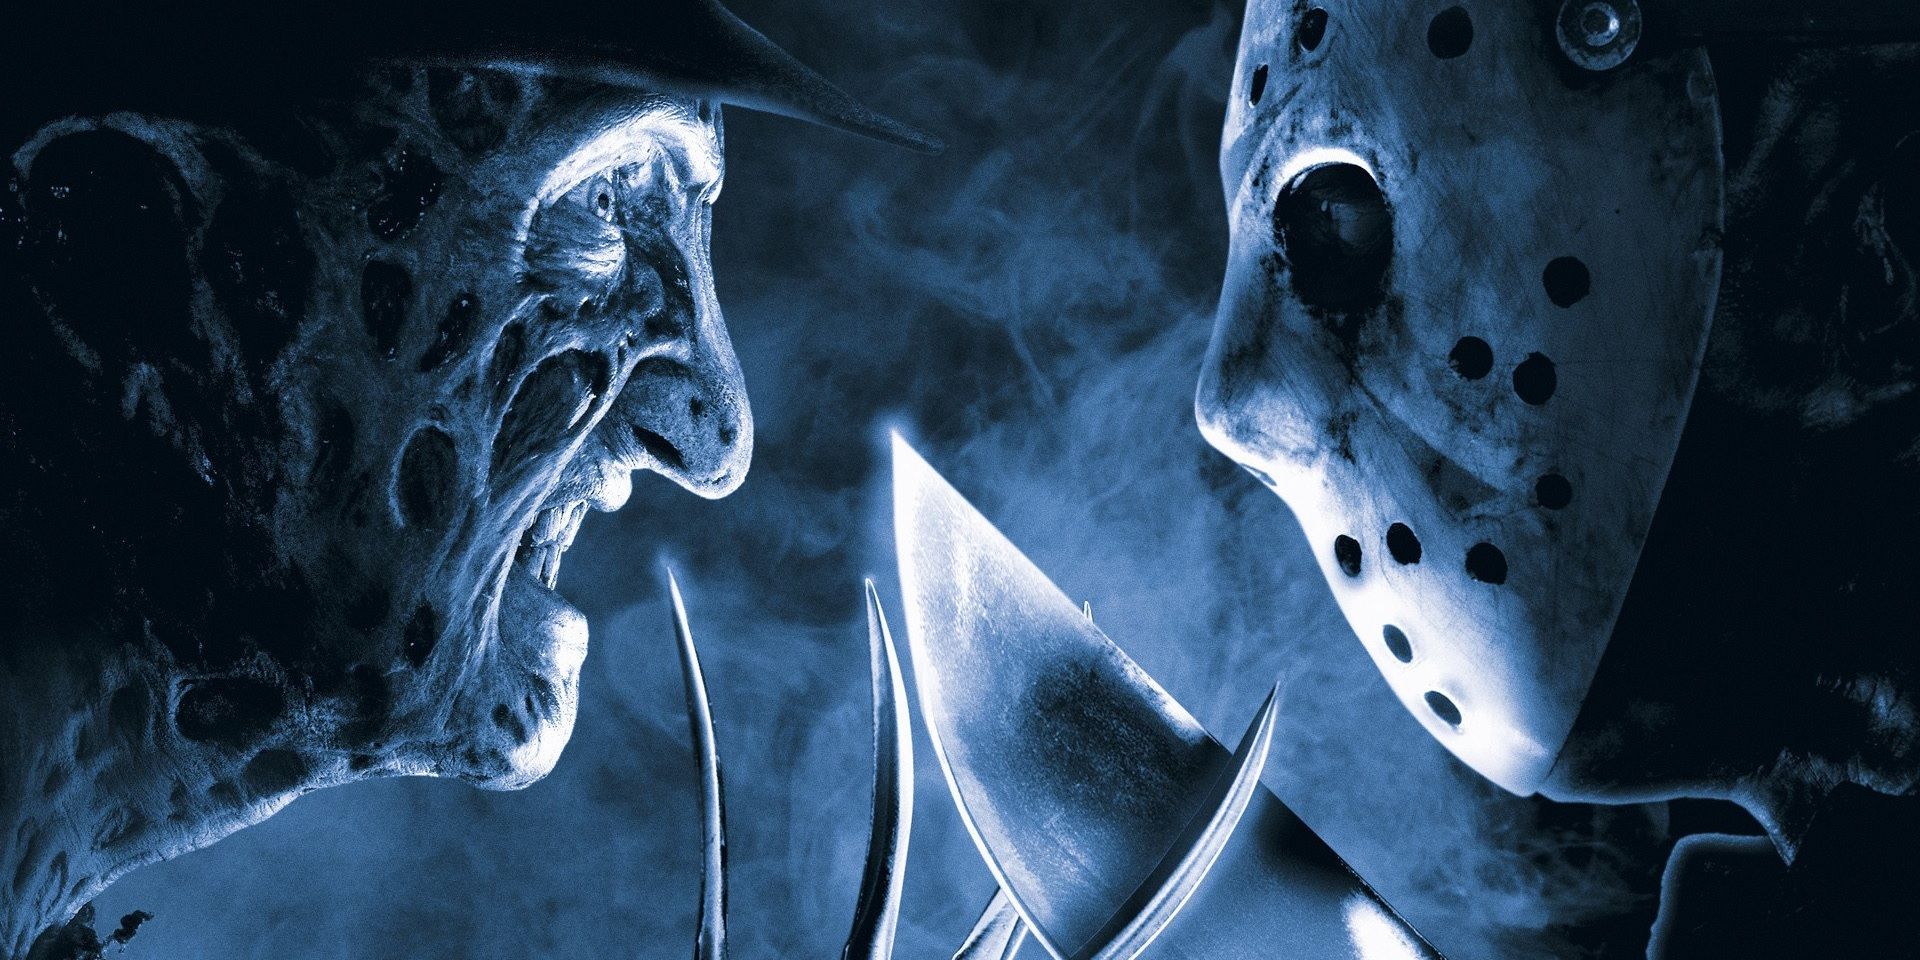 Freddy and Jason square off on the Freddy vs Jason poster